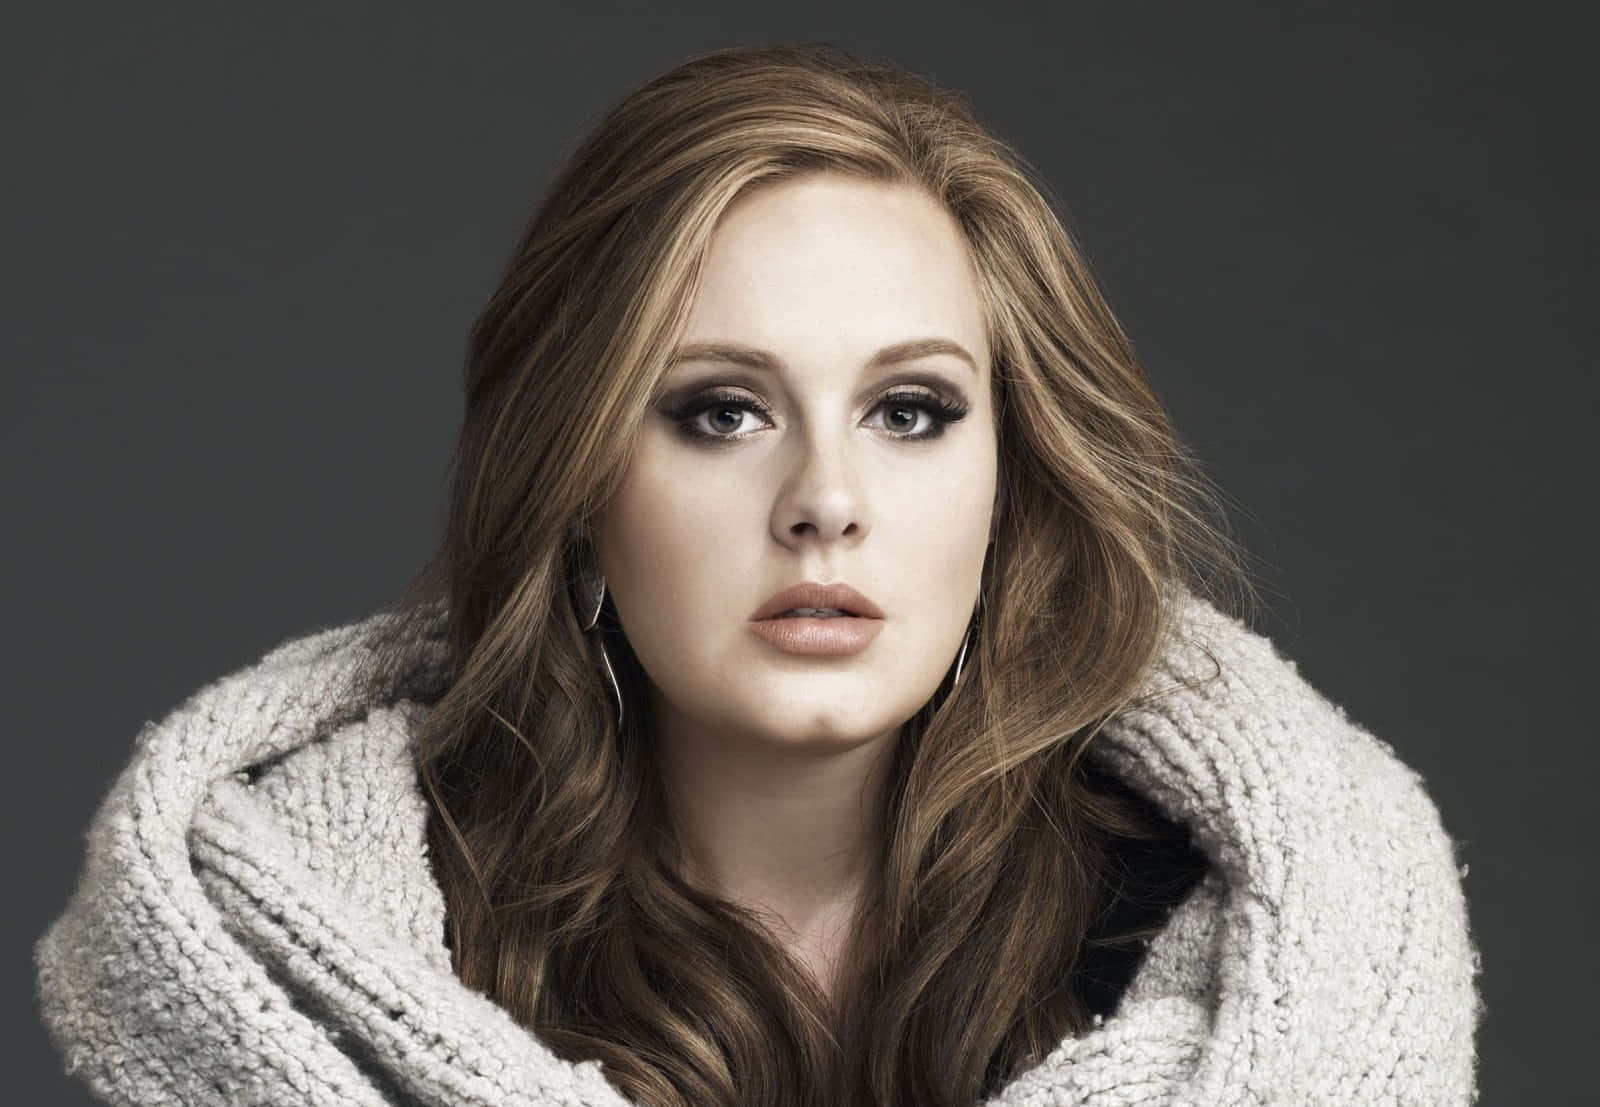 Adele posing for a photoshoot